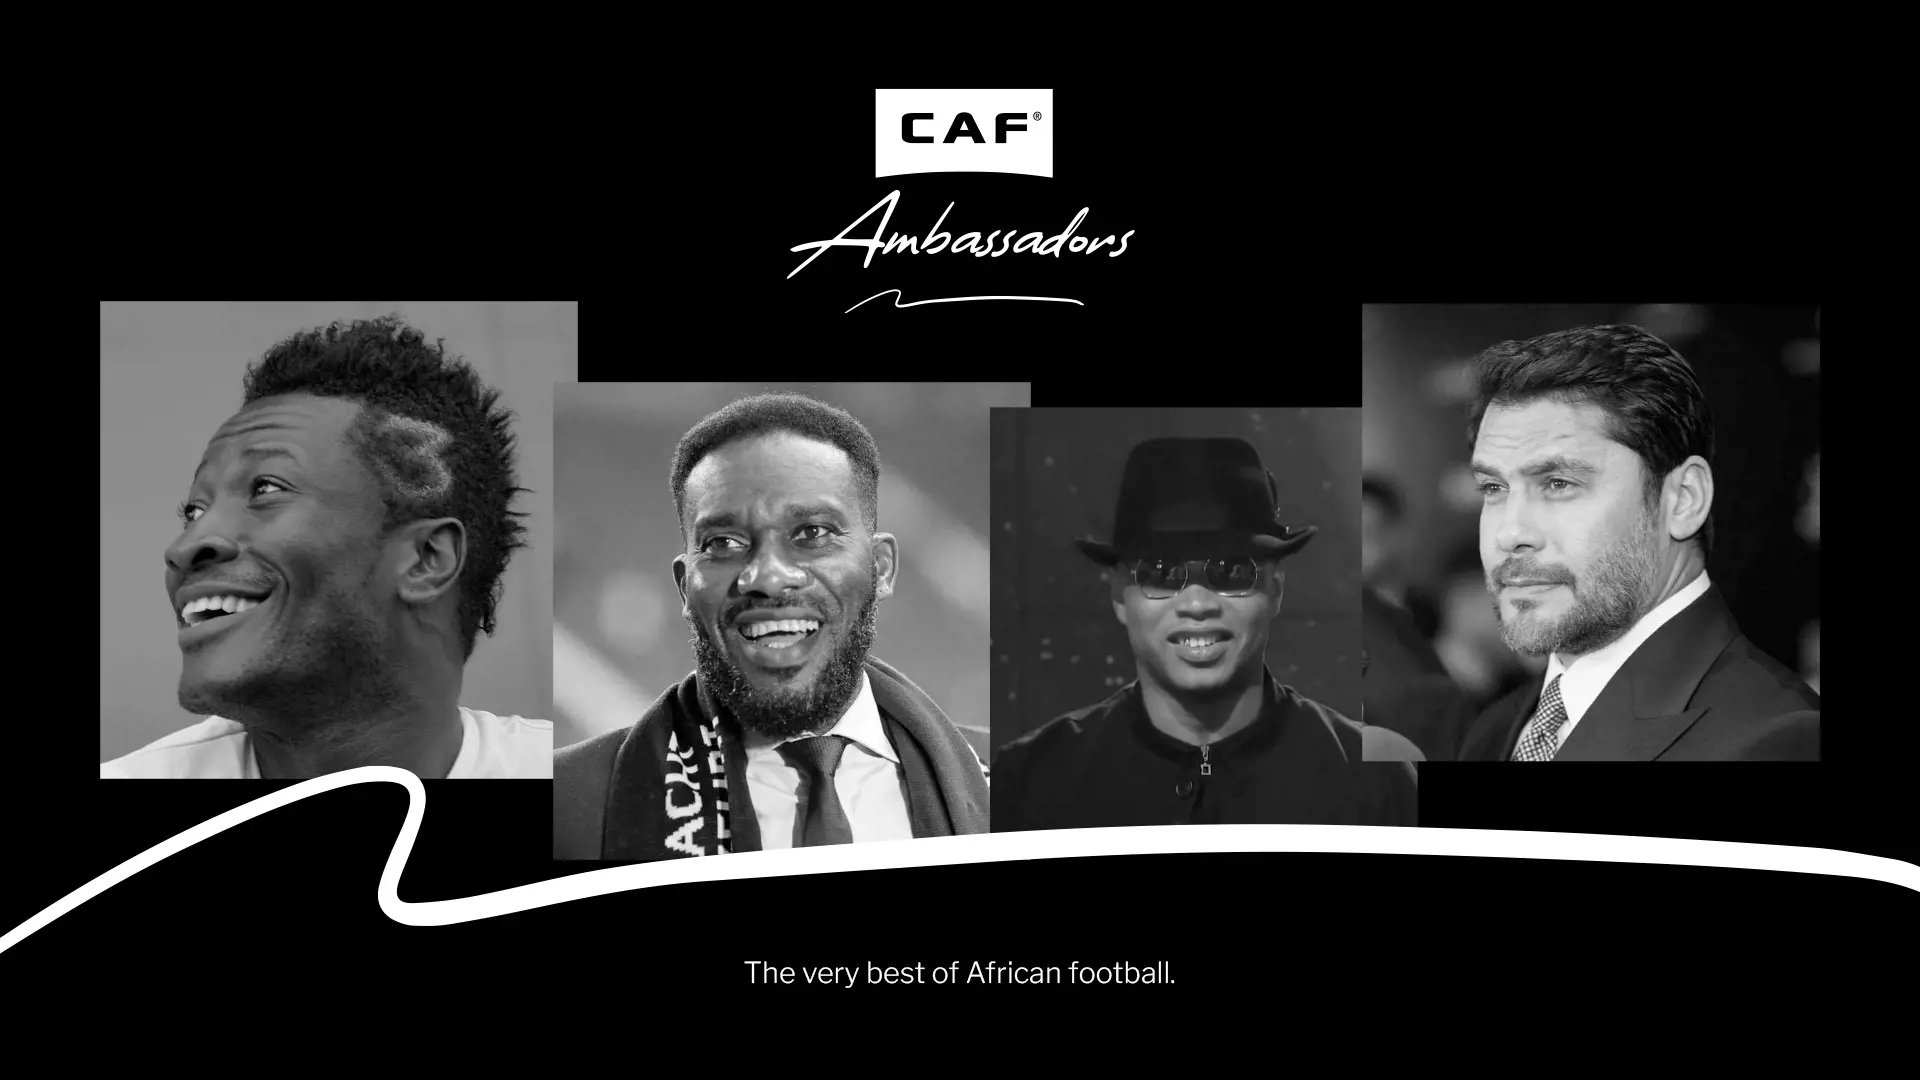 CAF appoints four African legends ambassadors to promote African football